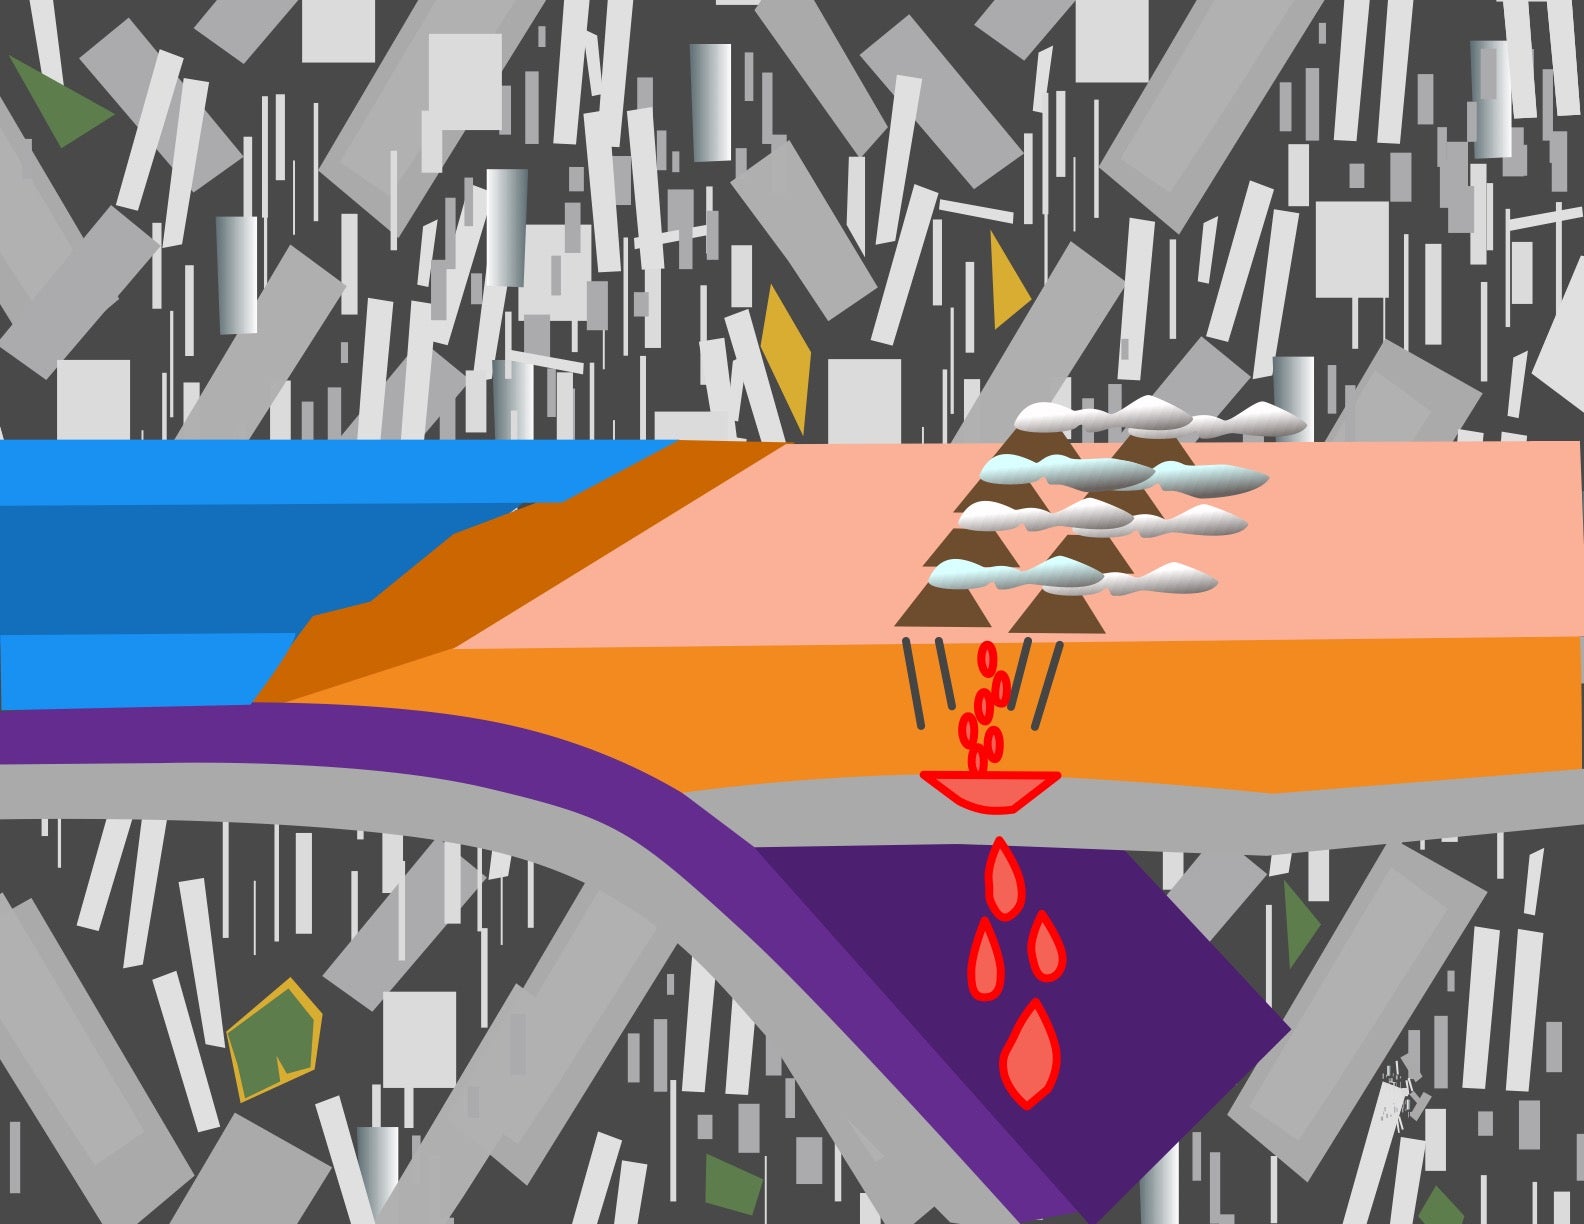 Illustration of subduction zone of two techtonic plates